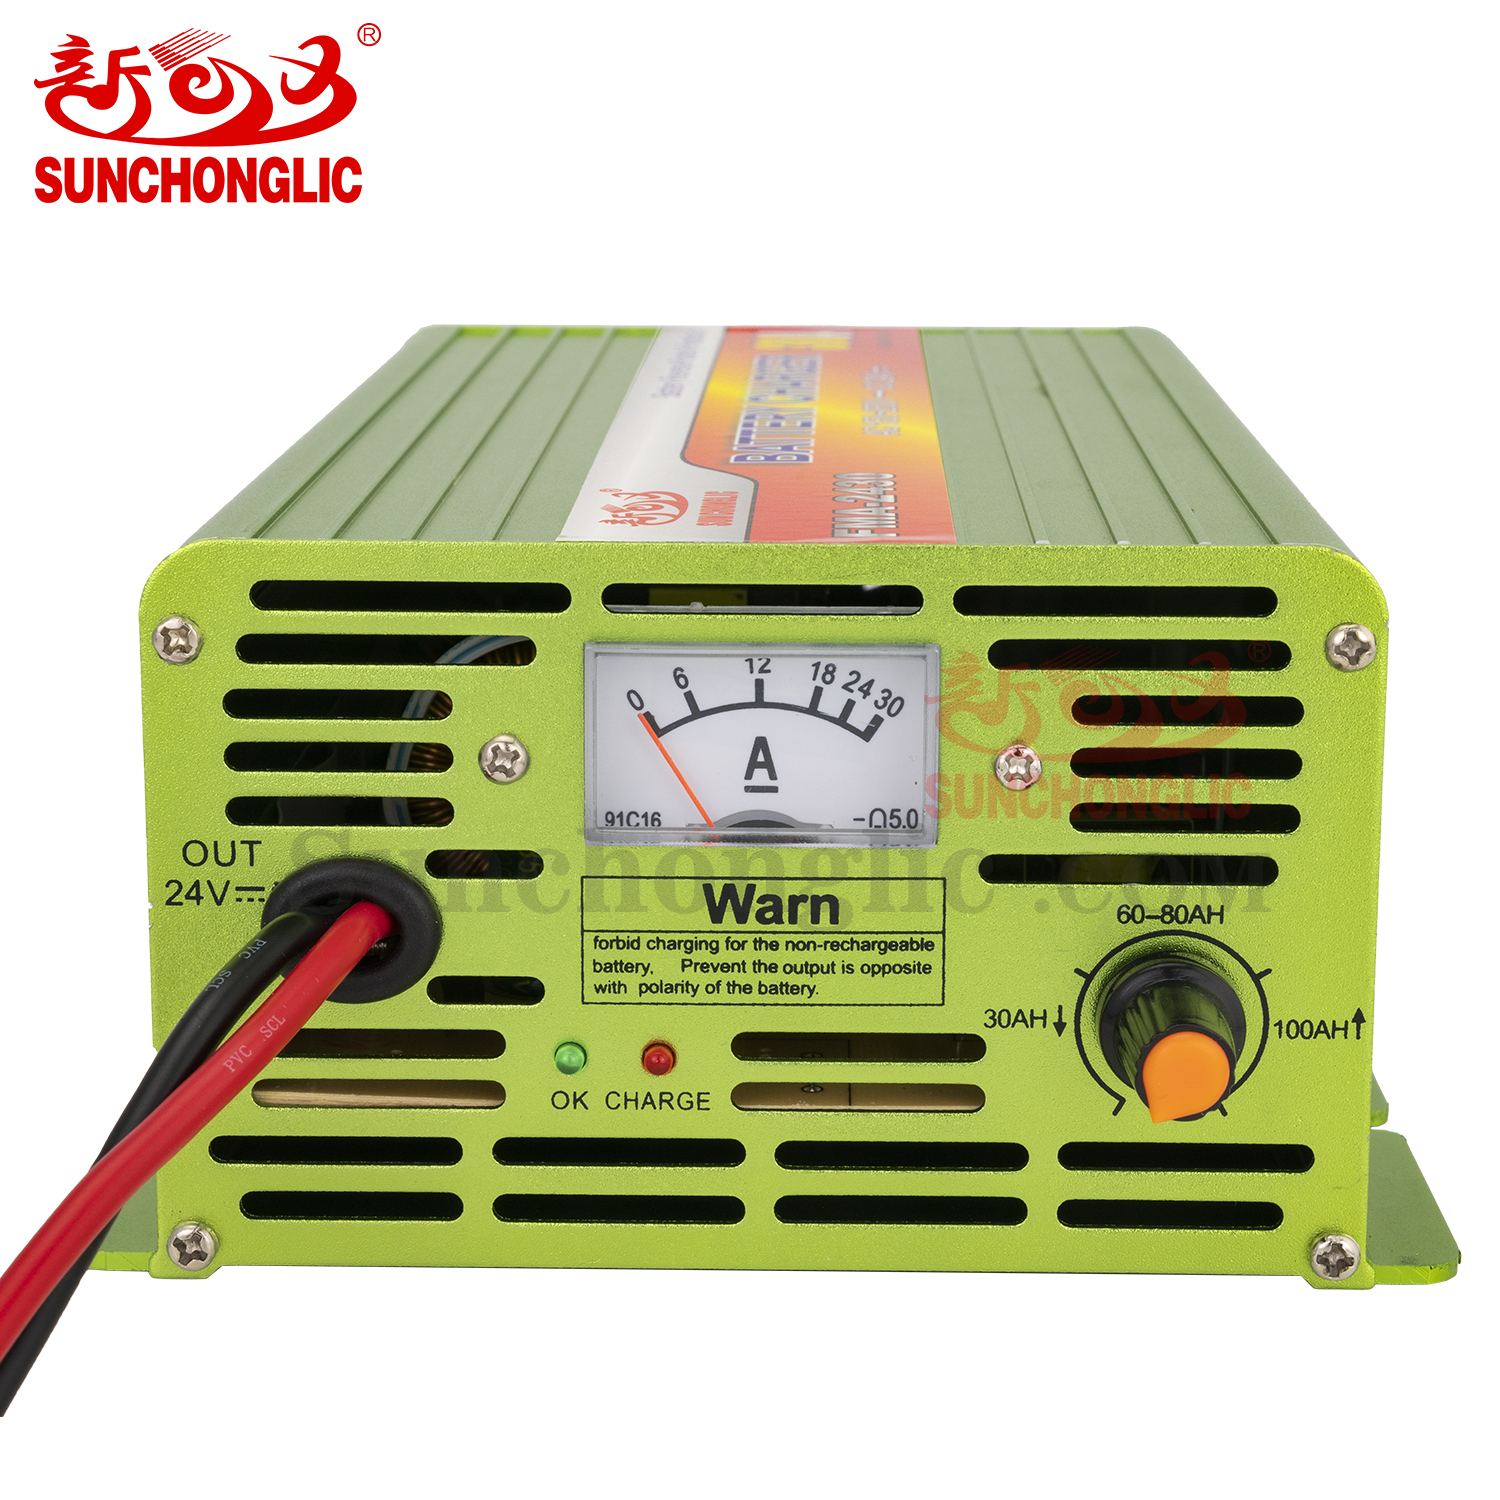 AGM/GEL Battery Charger - FMA-2430